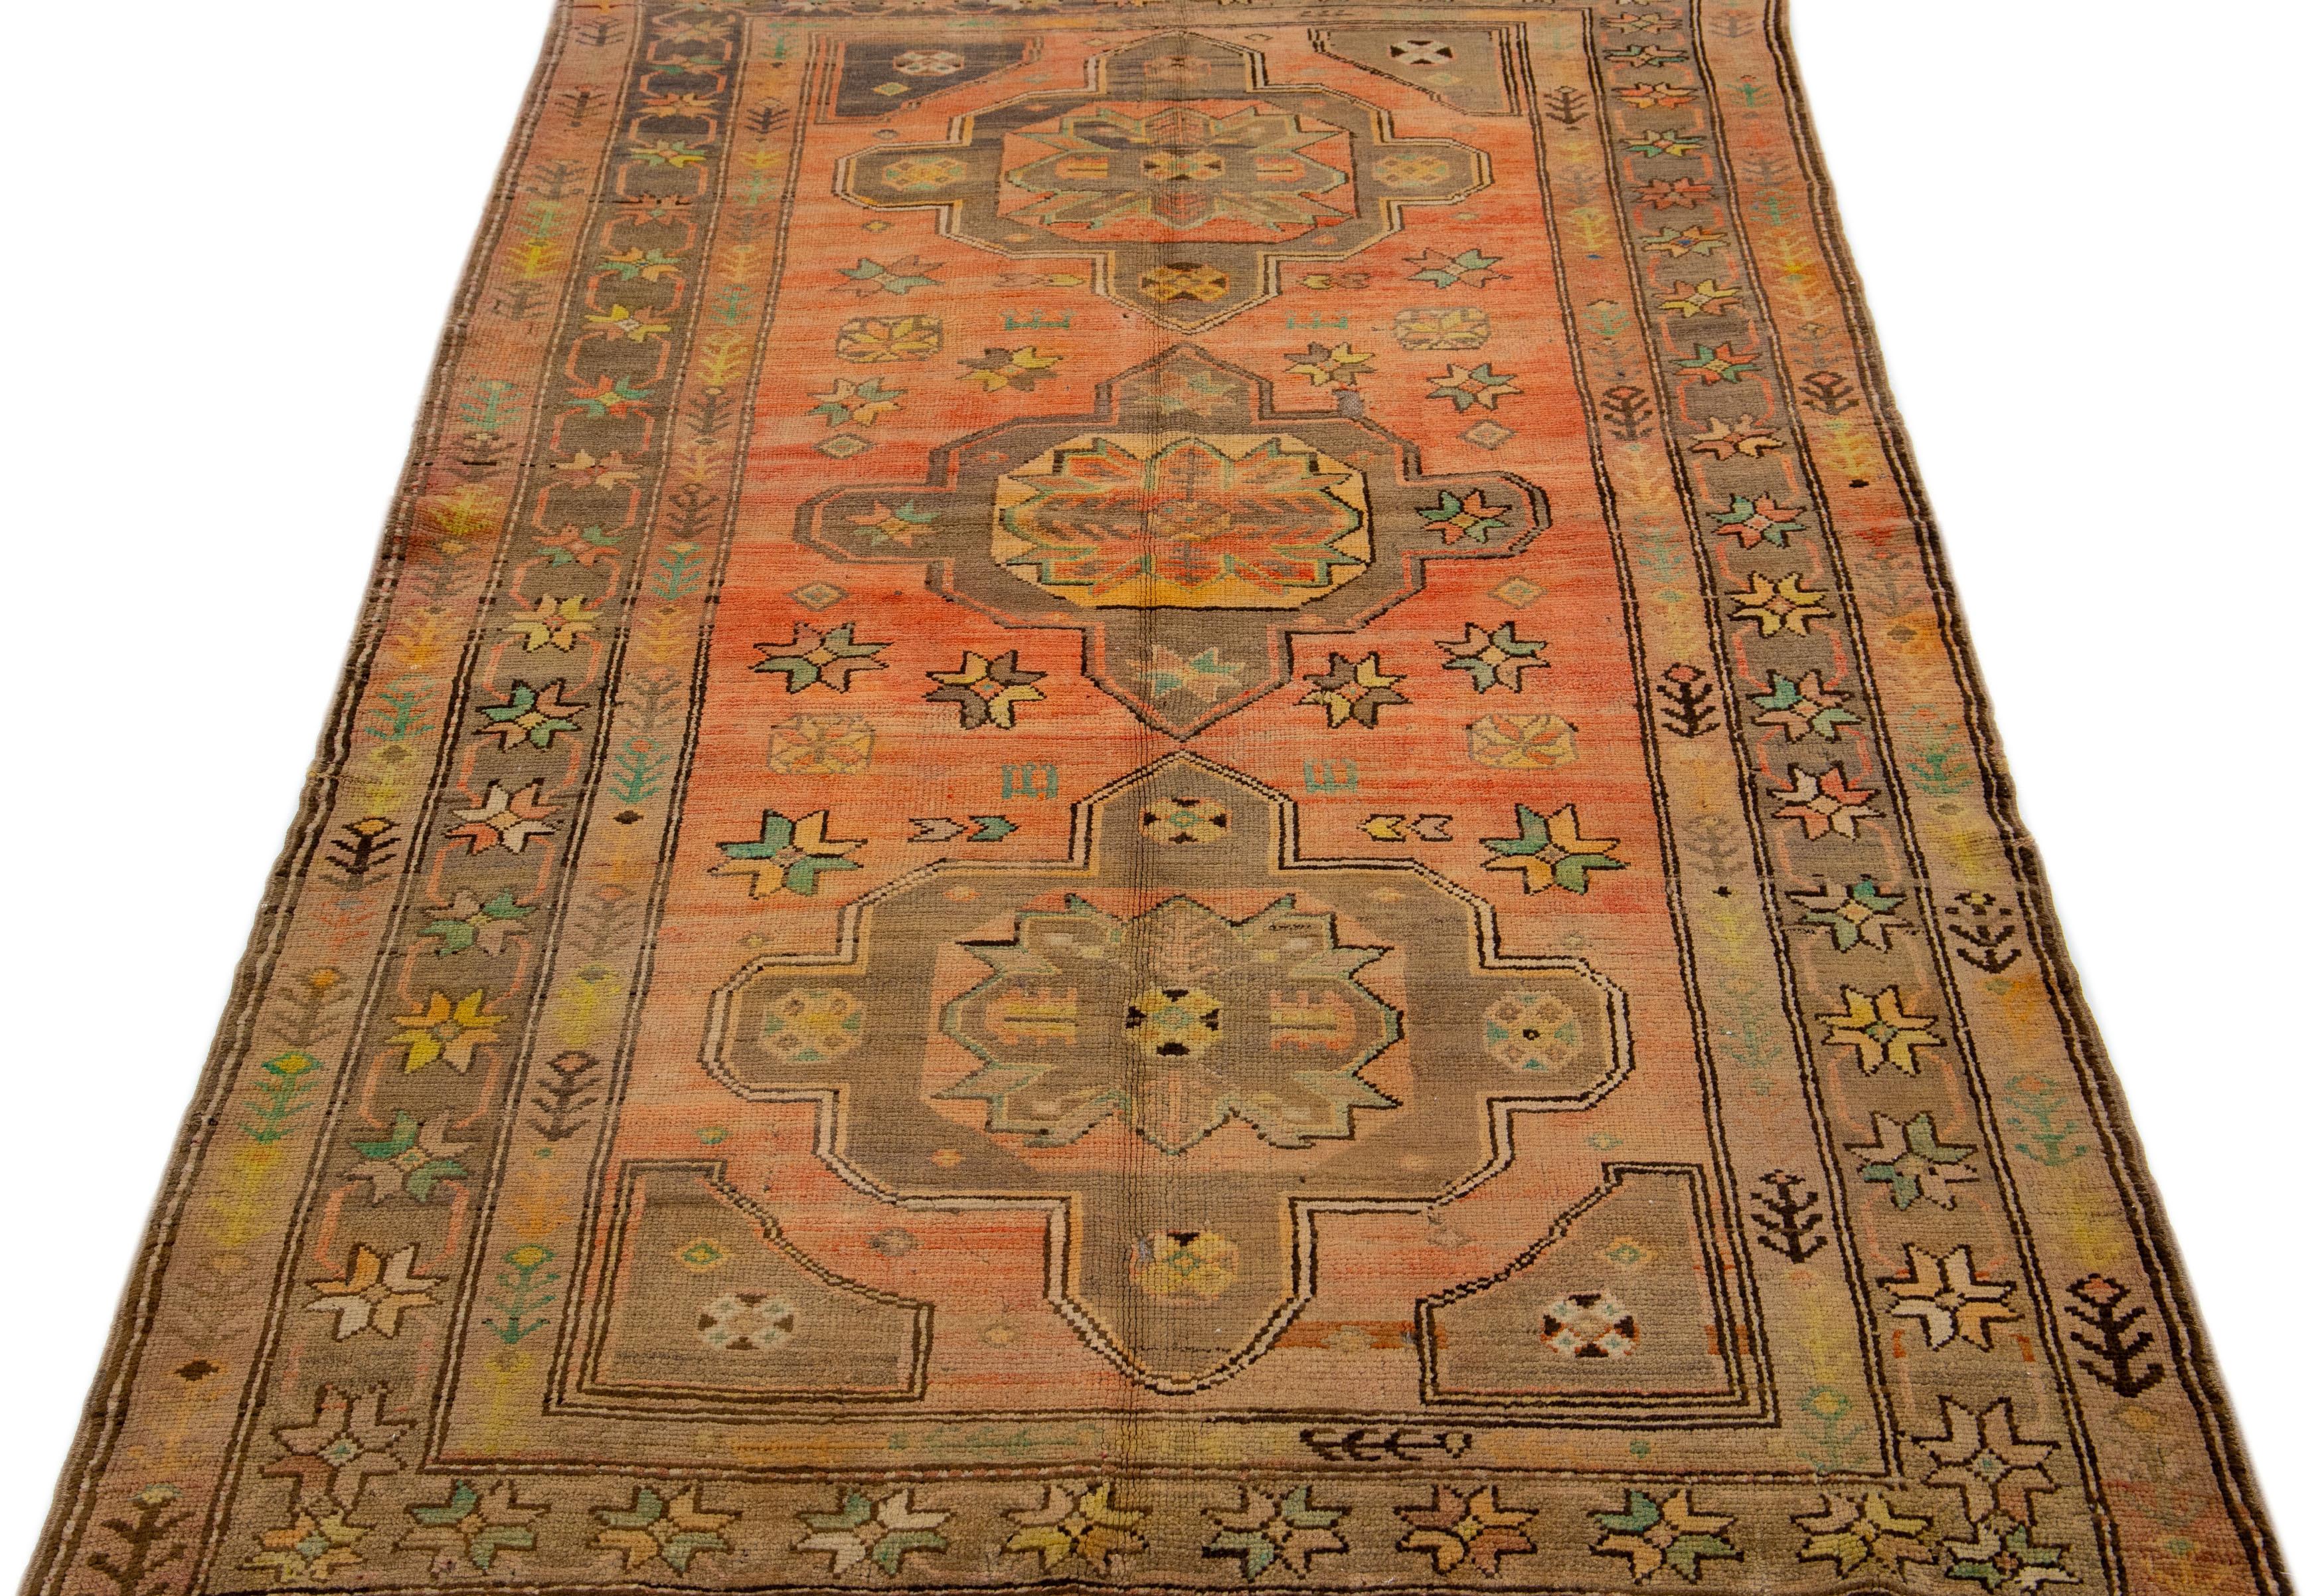 Beautiful Antique Turkish Khotan Hand-knotted wool rug with a terracotta field. This Khotan rug has yellow, blue, and gray accents in a gorgeous all-over tribal design.

This runner measures 4'5